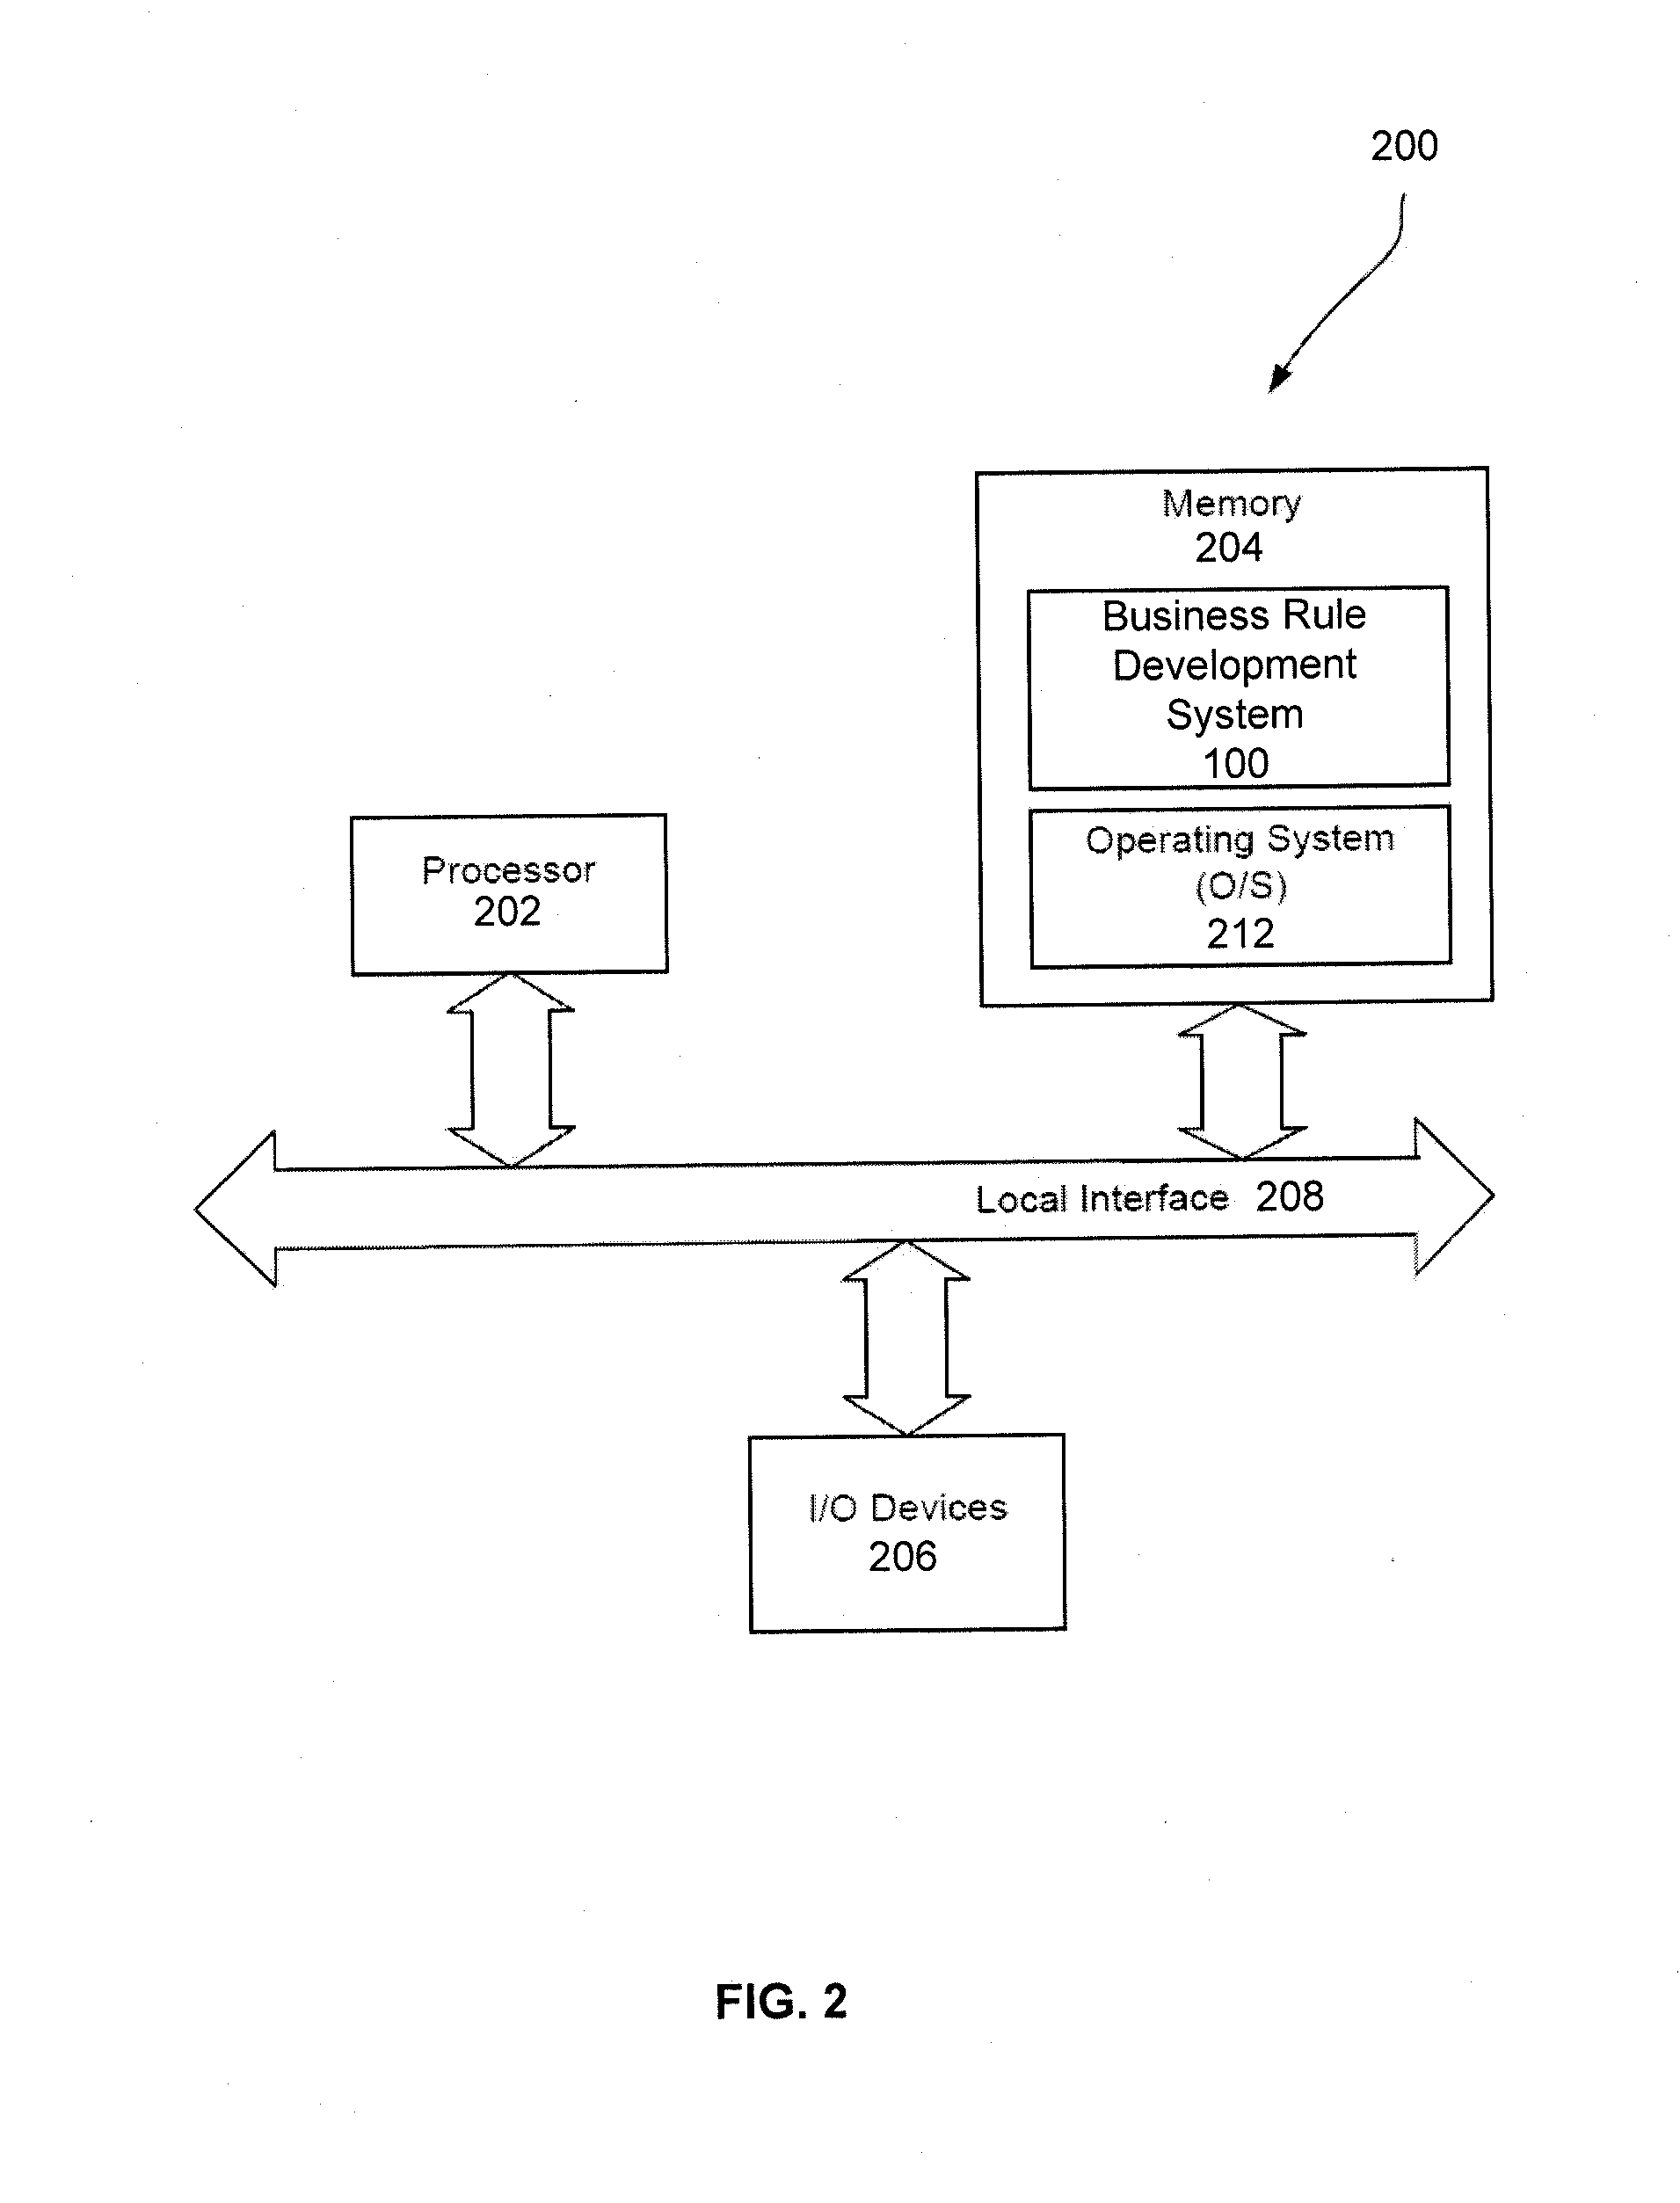 System and method for developing business rules for decision engines